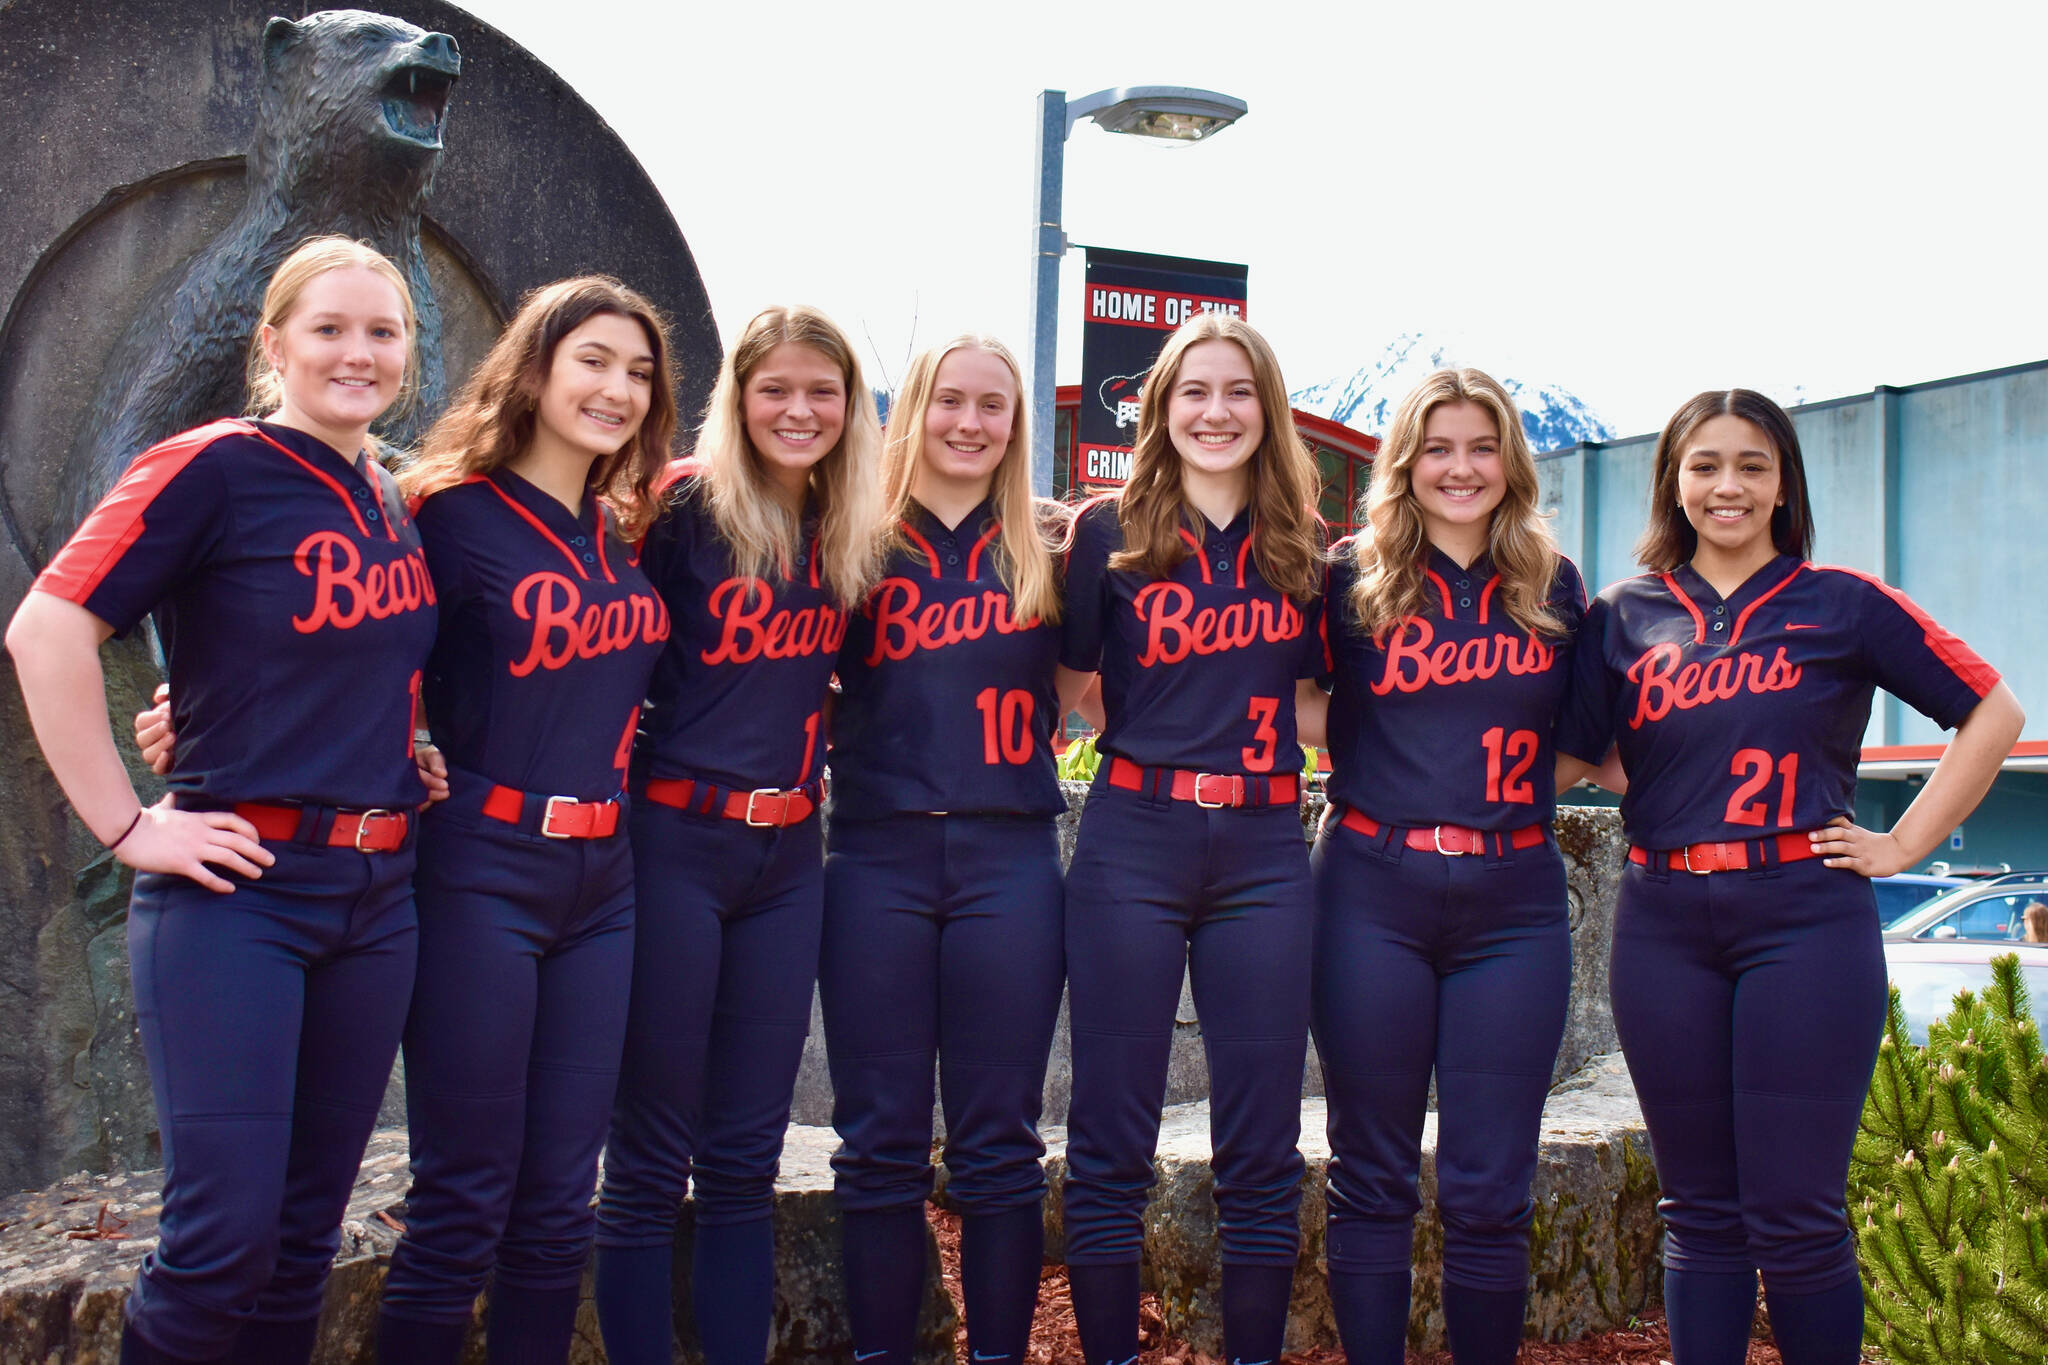 Juneau-Douglas High School: Yadaa.at Kalé Crimson Bears senior softball players, from left, Mariah Schauwecker, Bailey Hansen, Zoey Billings, Anna Dale, Carlynn Casperson, Gloria Bixby, and Amira Andrews, will be honored at 3:30 p.m. Saturday on Melvin Park Field before their game against Thunder Mountain. (Courtesy Photo / JDHS Softball)